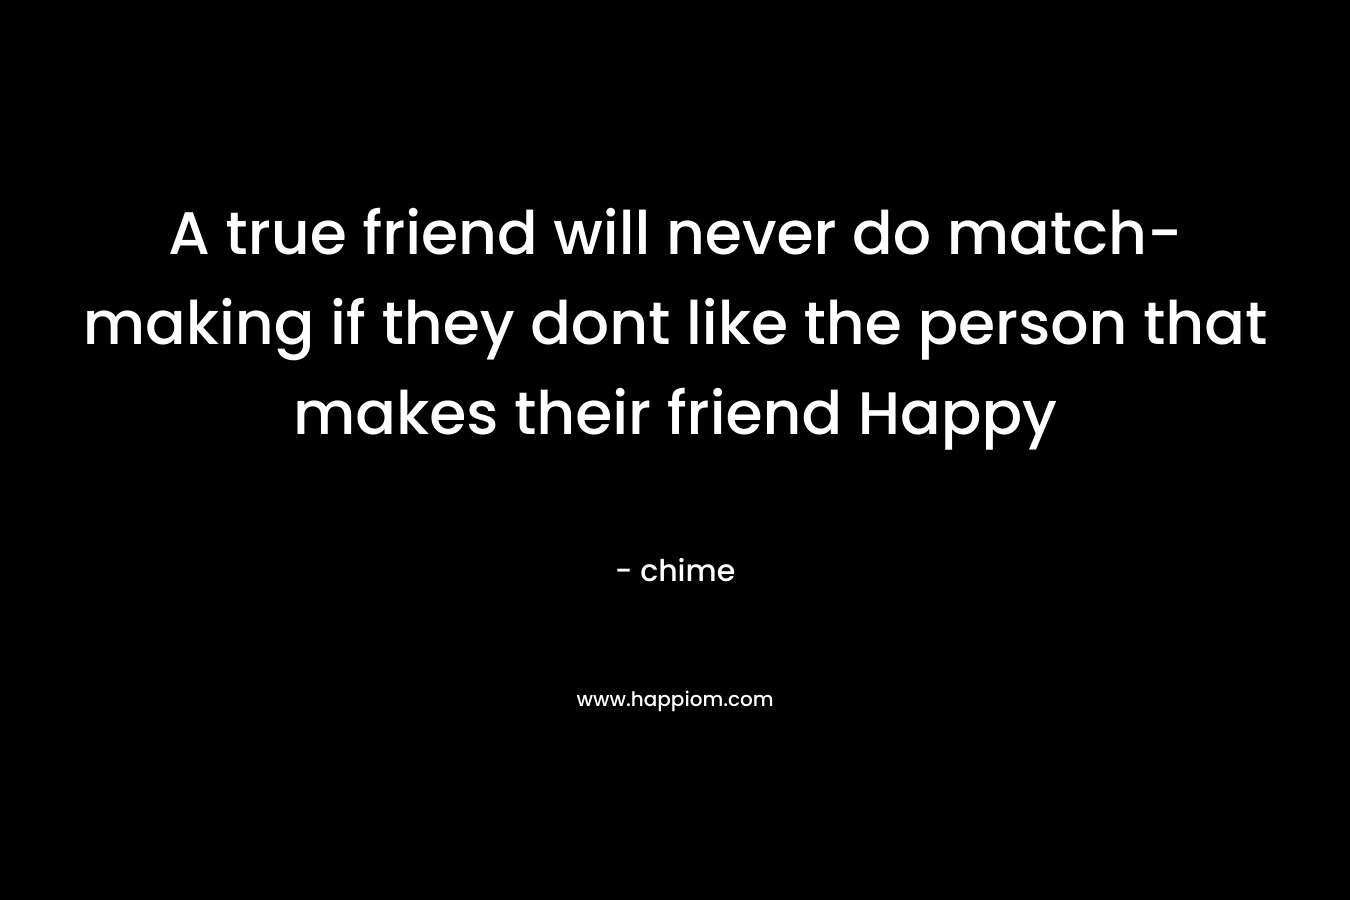 A true friend will never do match-making if they dont like the person that makes their friend Happy